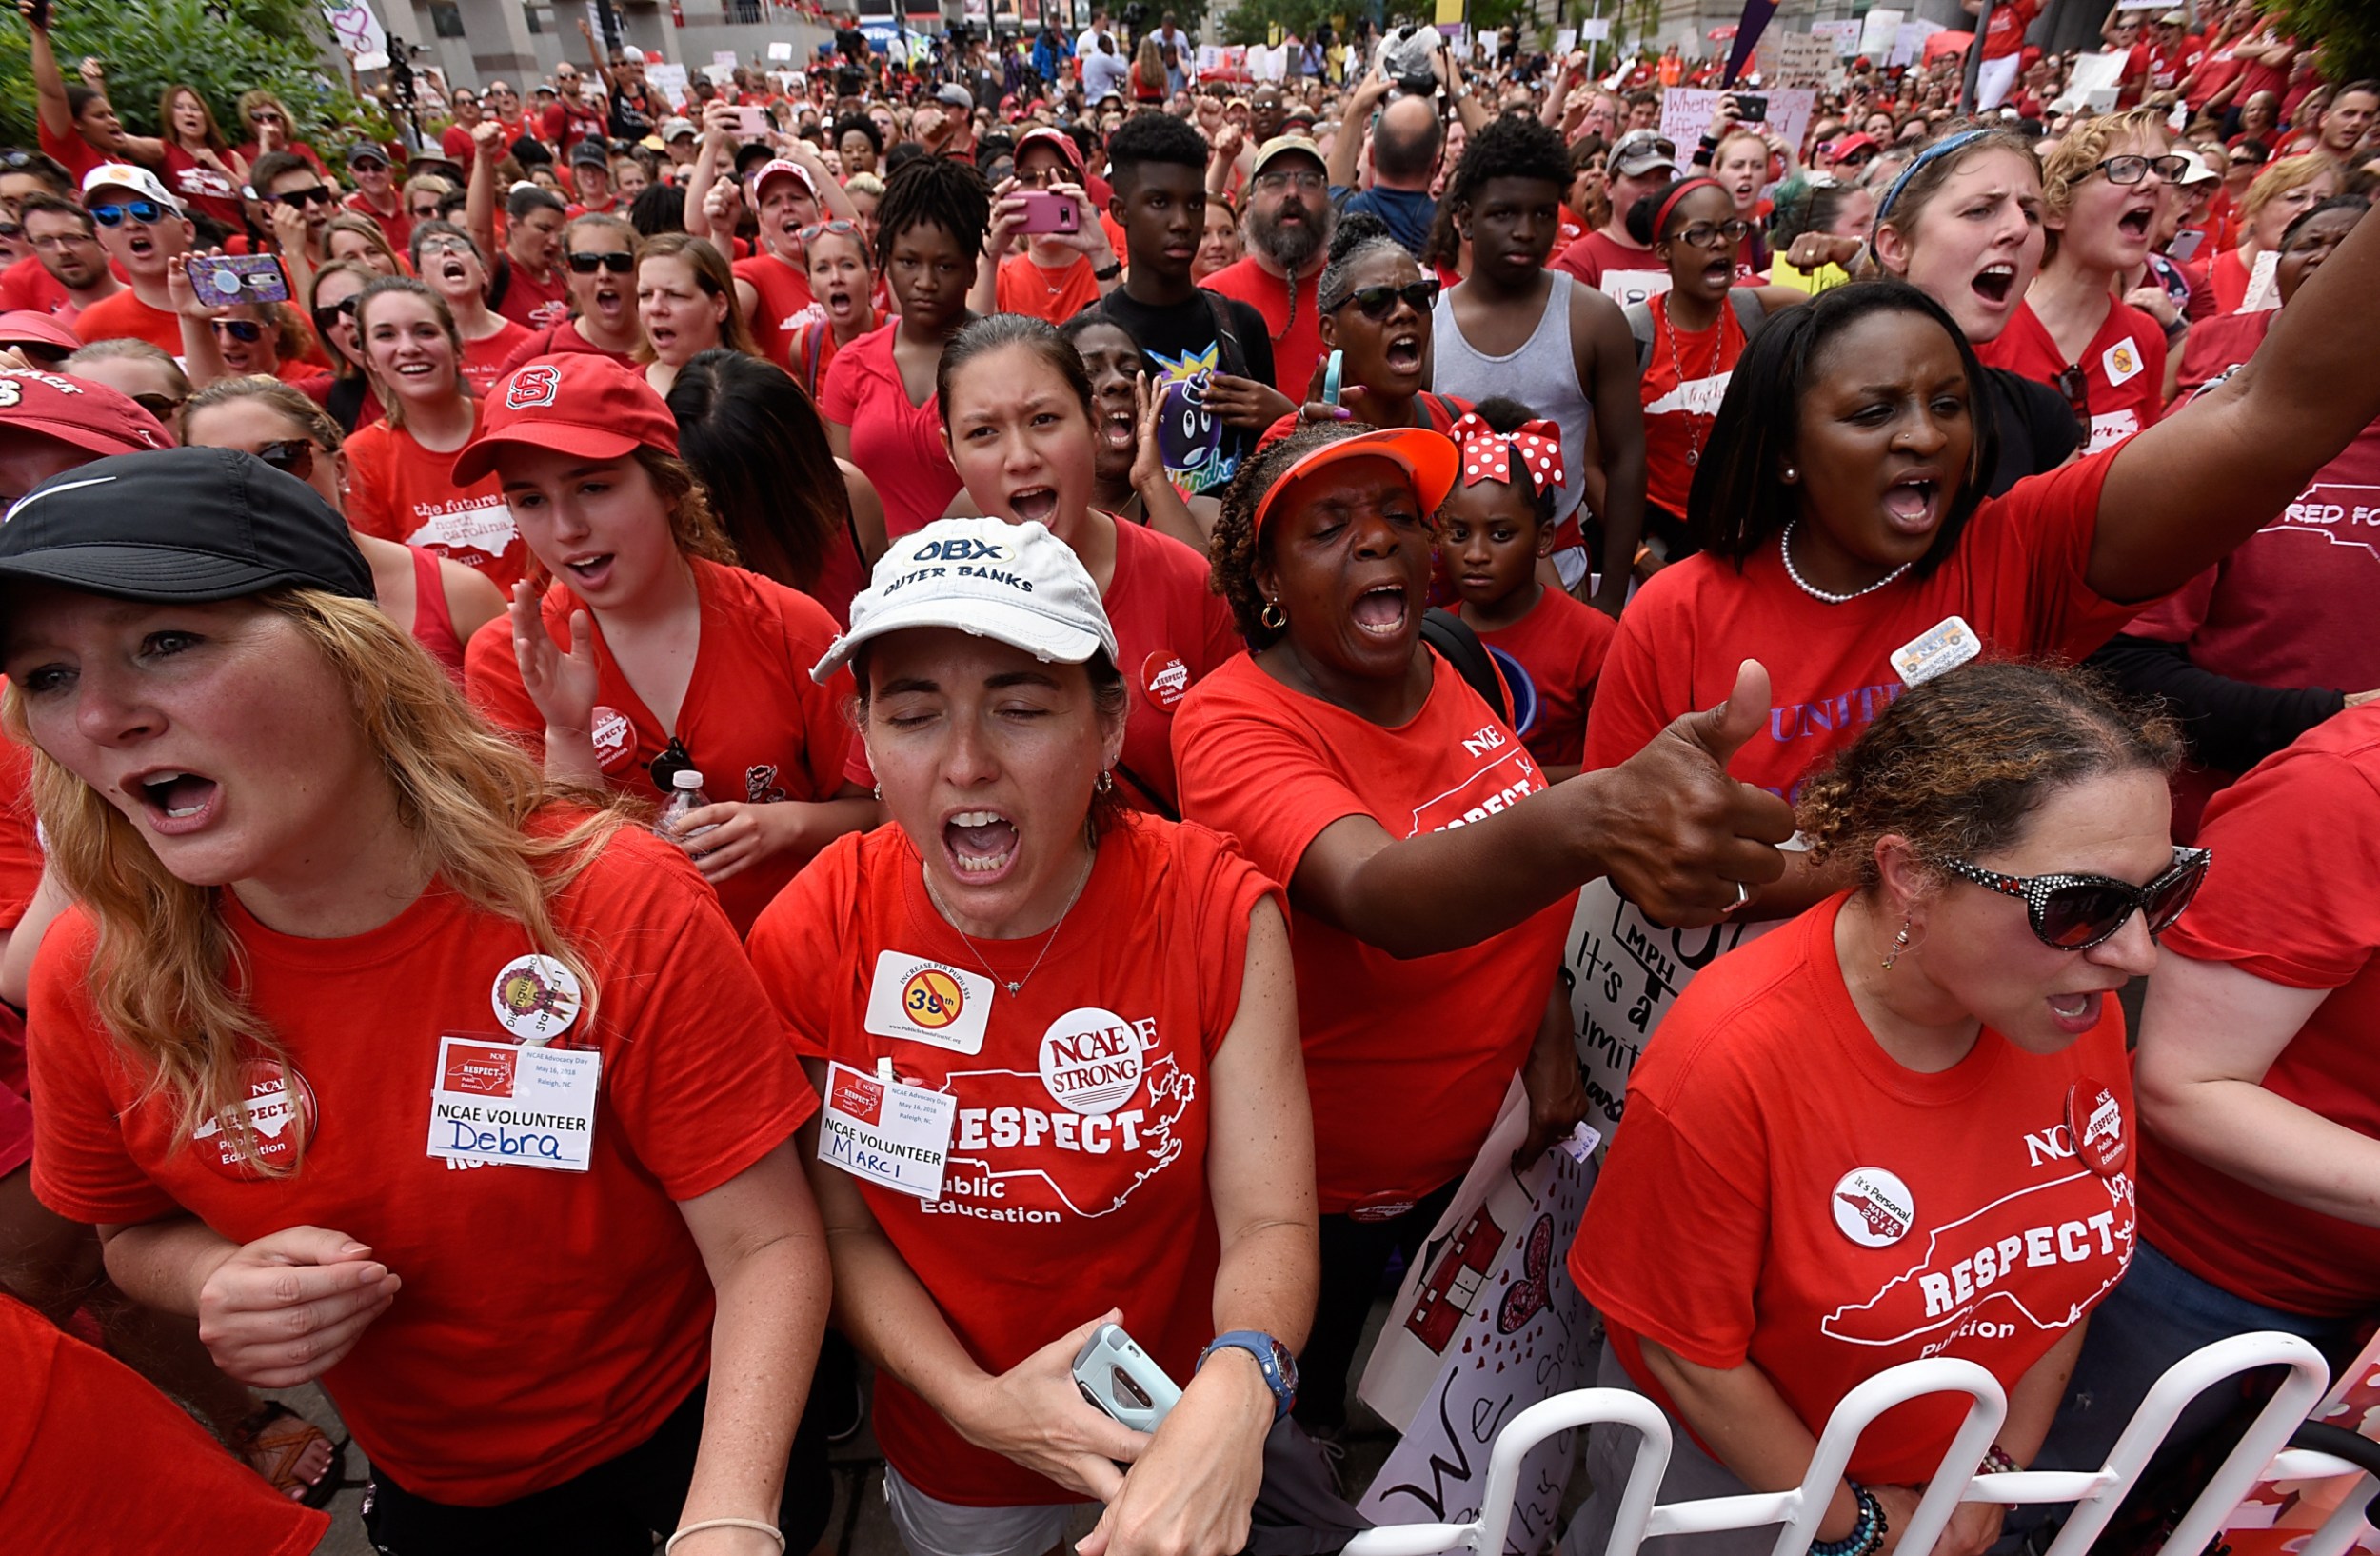 RALEIGH, NC - MAY 16: Crowds cheer during the Rally for Respect outside the North Carolina Legislative Building on May 16, 2018 in Raleigh, North Carolina. Several North Carolina counties closed schools to allow teachers to march on the opening day of the General Assembly.  (Photo by Sara D. Davis/Getty Images)